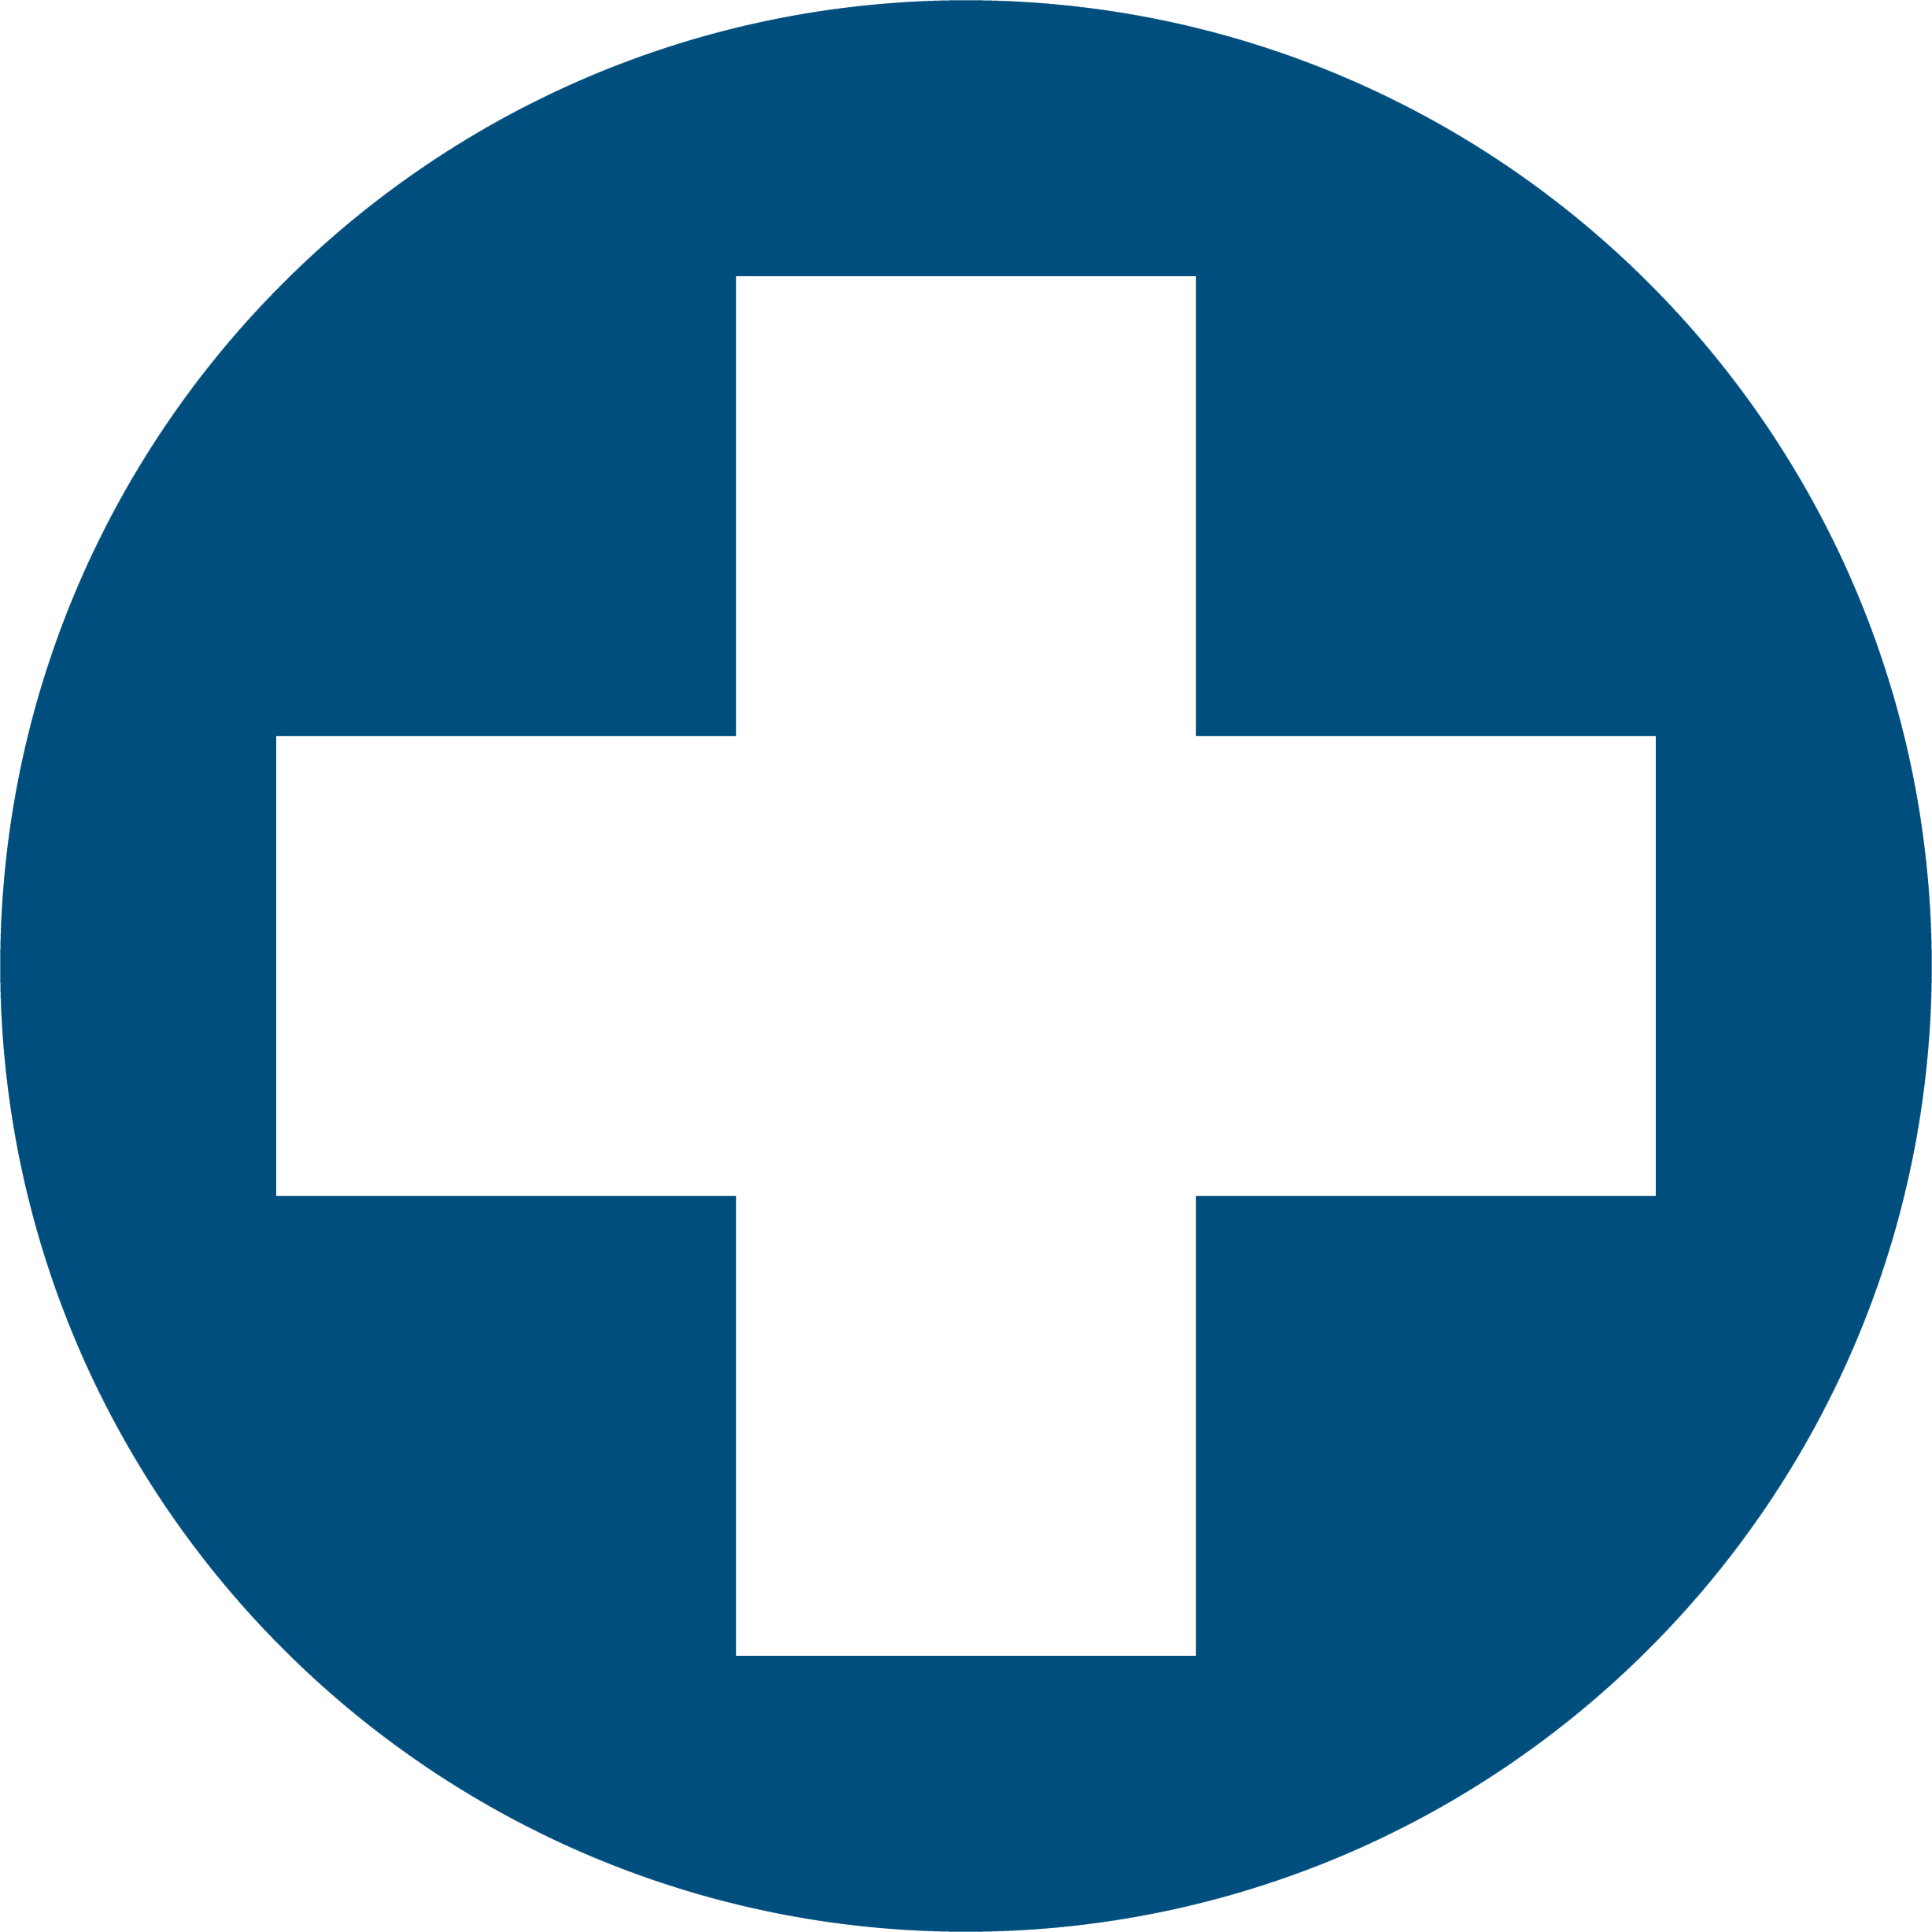 Medical Cross button for COVID-19 Information